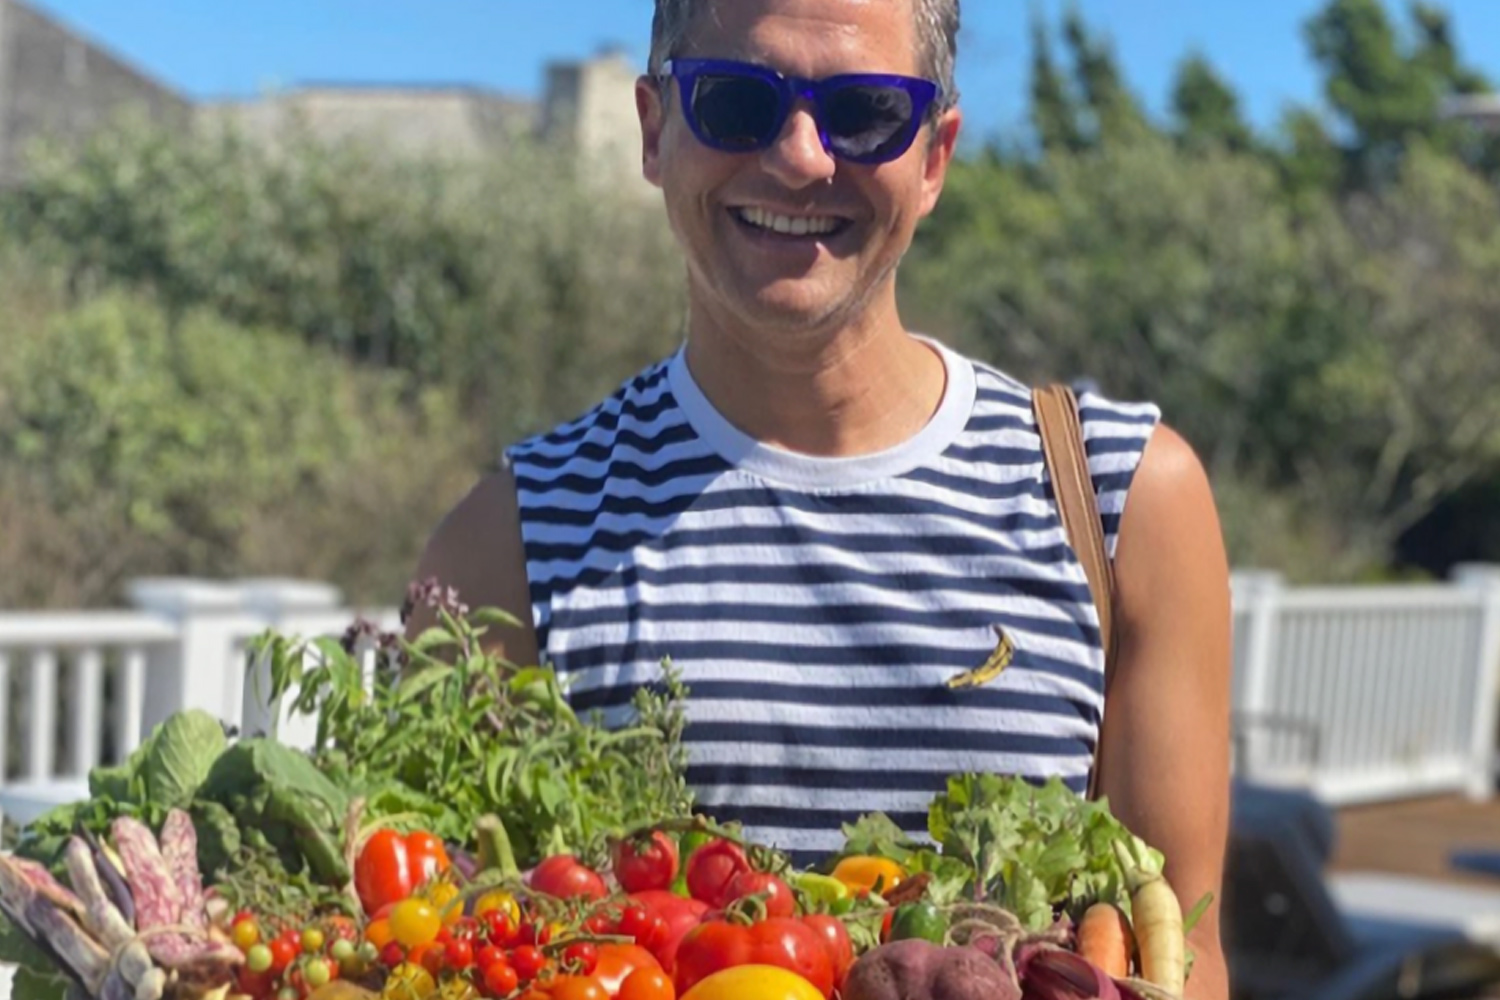 David Burtka holding a basket of produce, wearing a blue and white striped shirt and sunglasses, smiling